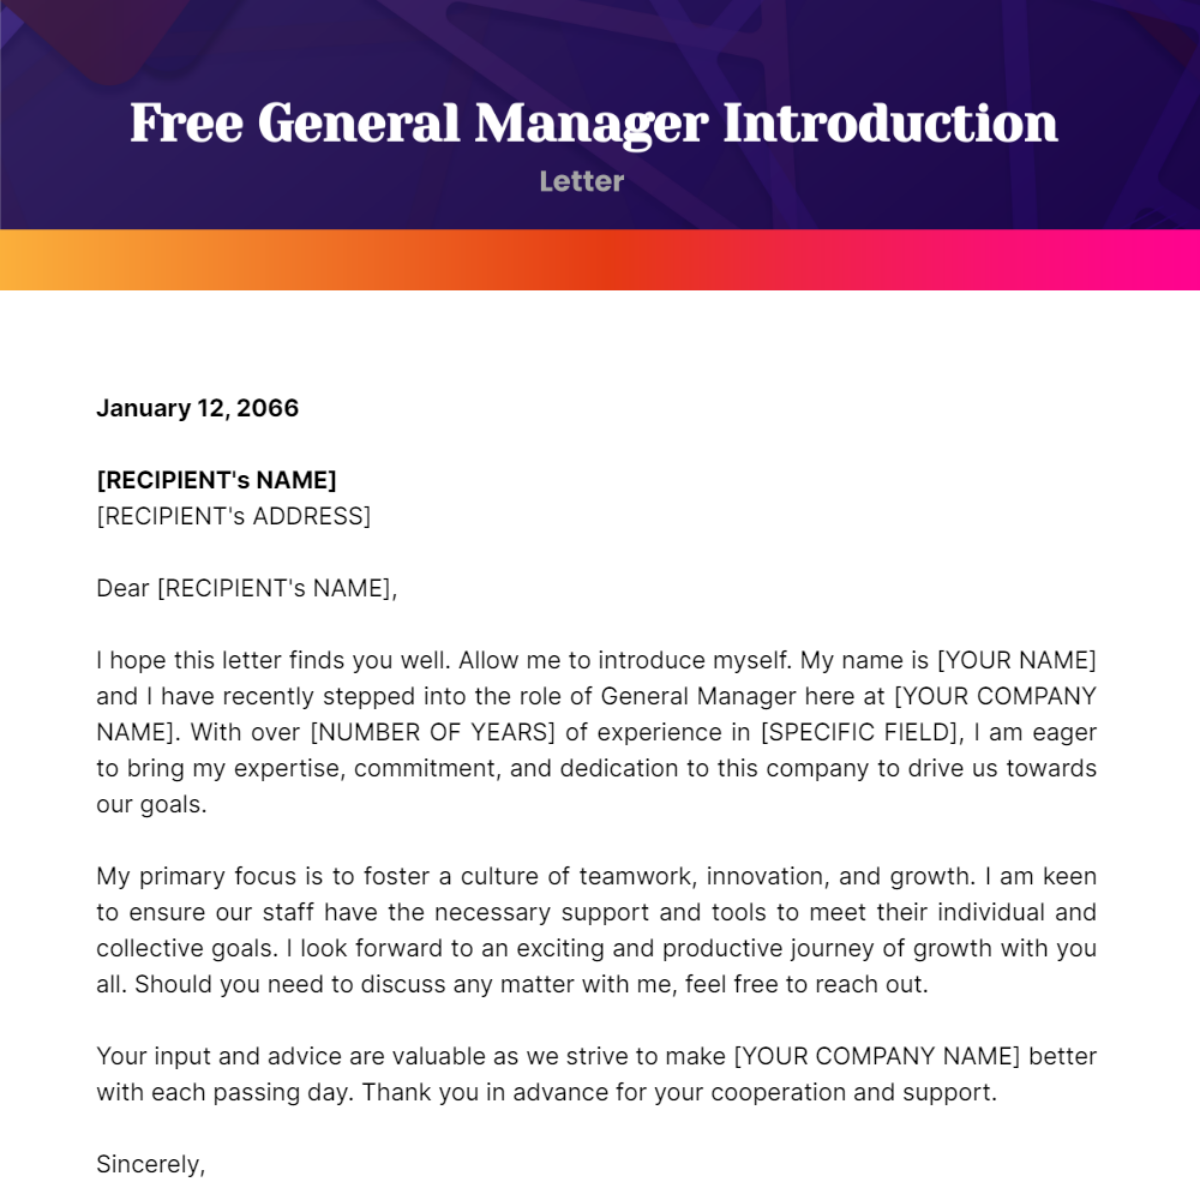 General Manager Introduction Letter Template